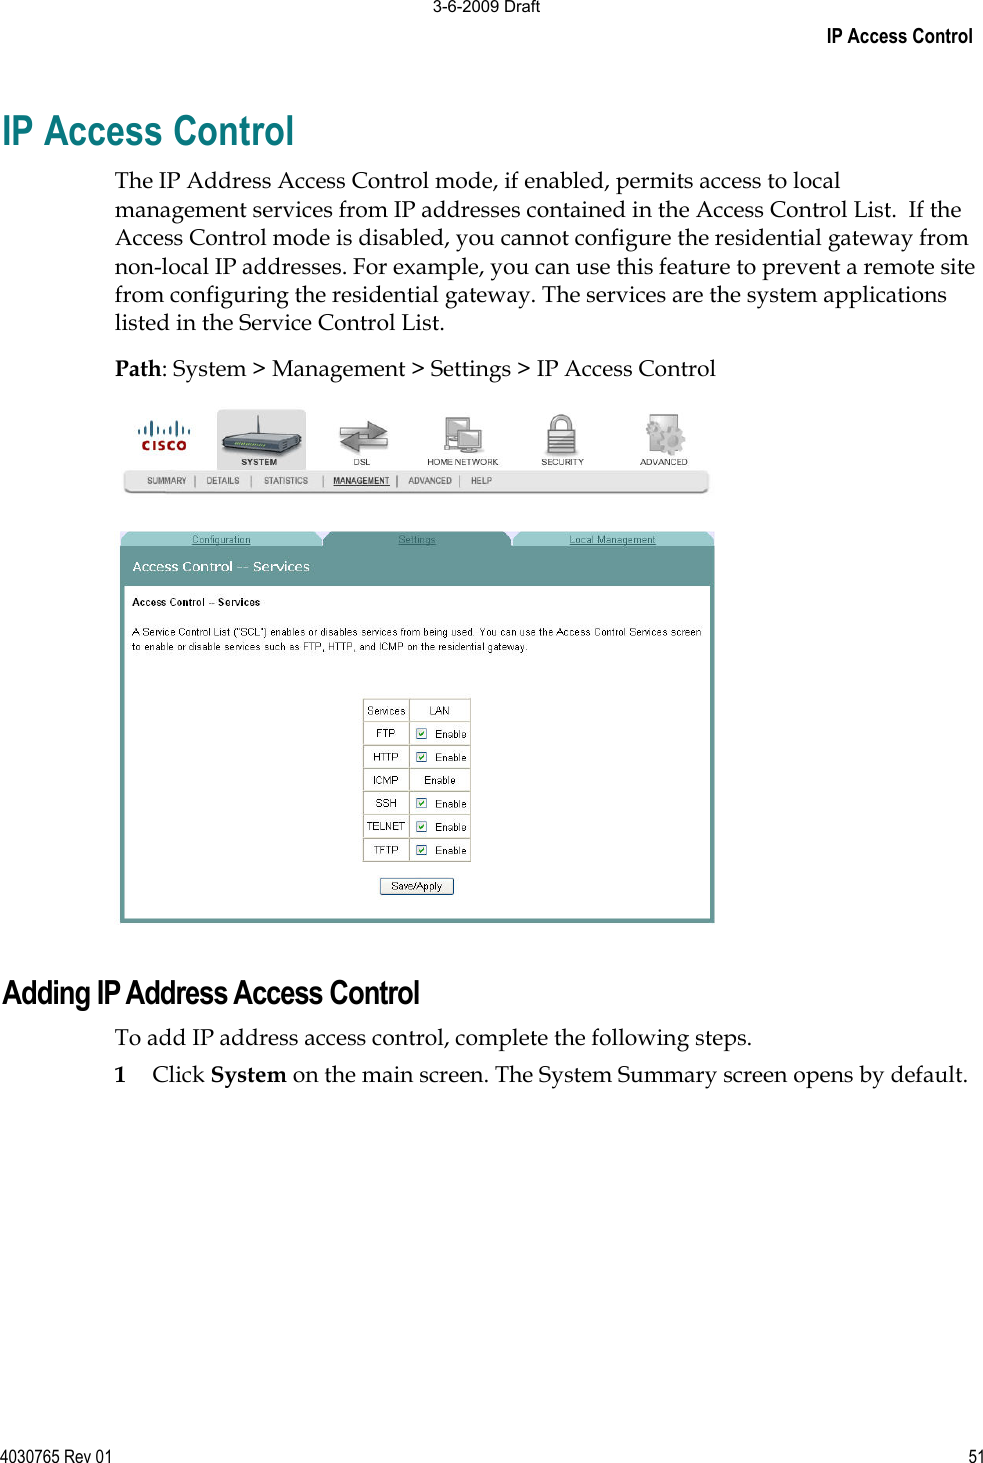 IP Access Control 4030765 Rev 01 51IP Access Control The IP Address Access Control mode, if enabled, permits access to local management services from IP addresses contained in the Access Control List.  If the Access Control mode is disabled, you cannot configure the residential gateway from non-local IP addresses. For example, you can use this feature to prevent a remote site from configuring the residential gateway. The services are the system applications listed in the Service Control List. Path: System &gt; Management &gt; Settings &gt; IP Access ControlAdding IP Address Access Control To add IP address access control, complete the following steps. 1Click System on the main screen. The System Summary screen opens by default. 3-6-2009 Draft